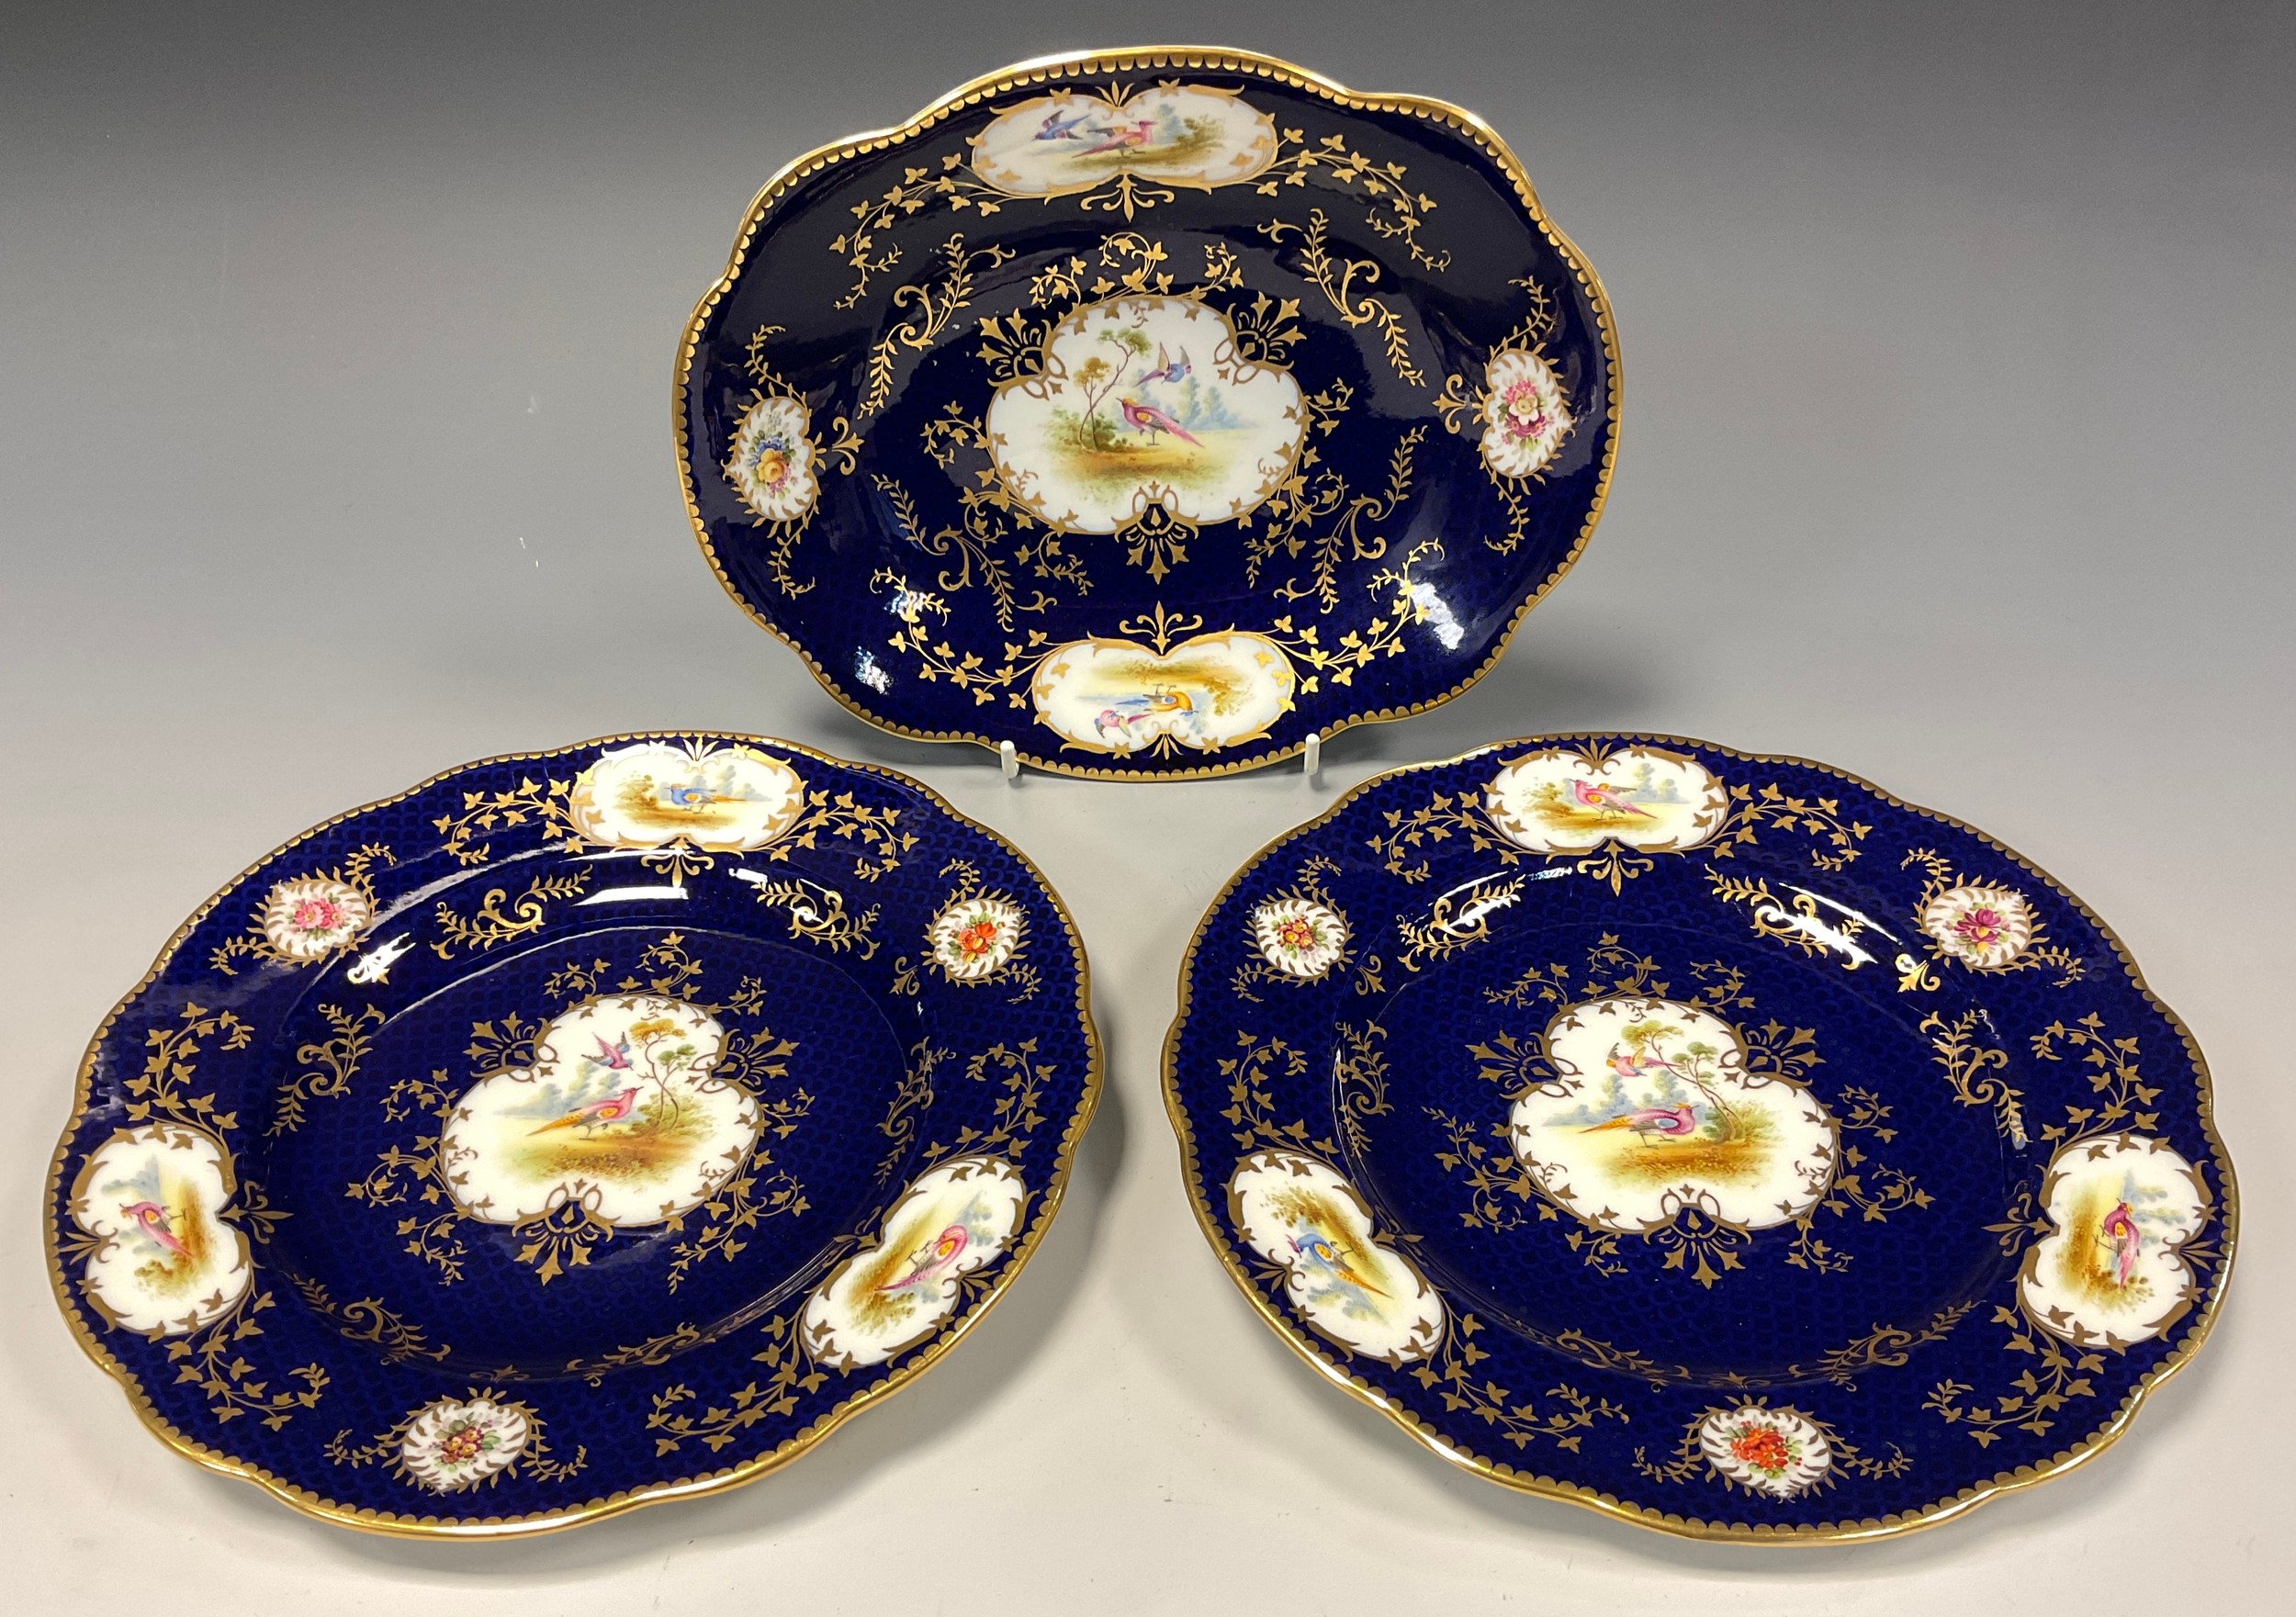 A Coalport oval dish and pair of circular plates painted with panels of birds and flowers, cobalt